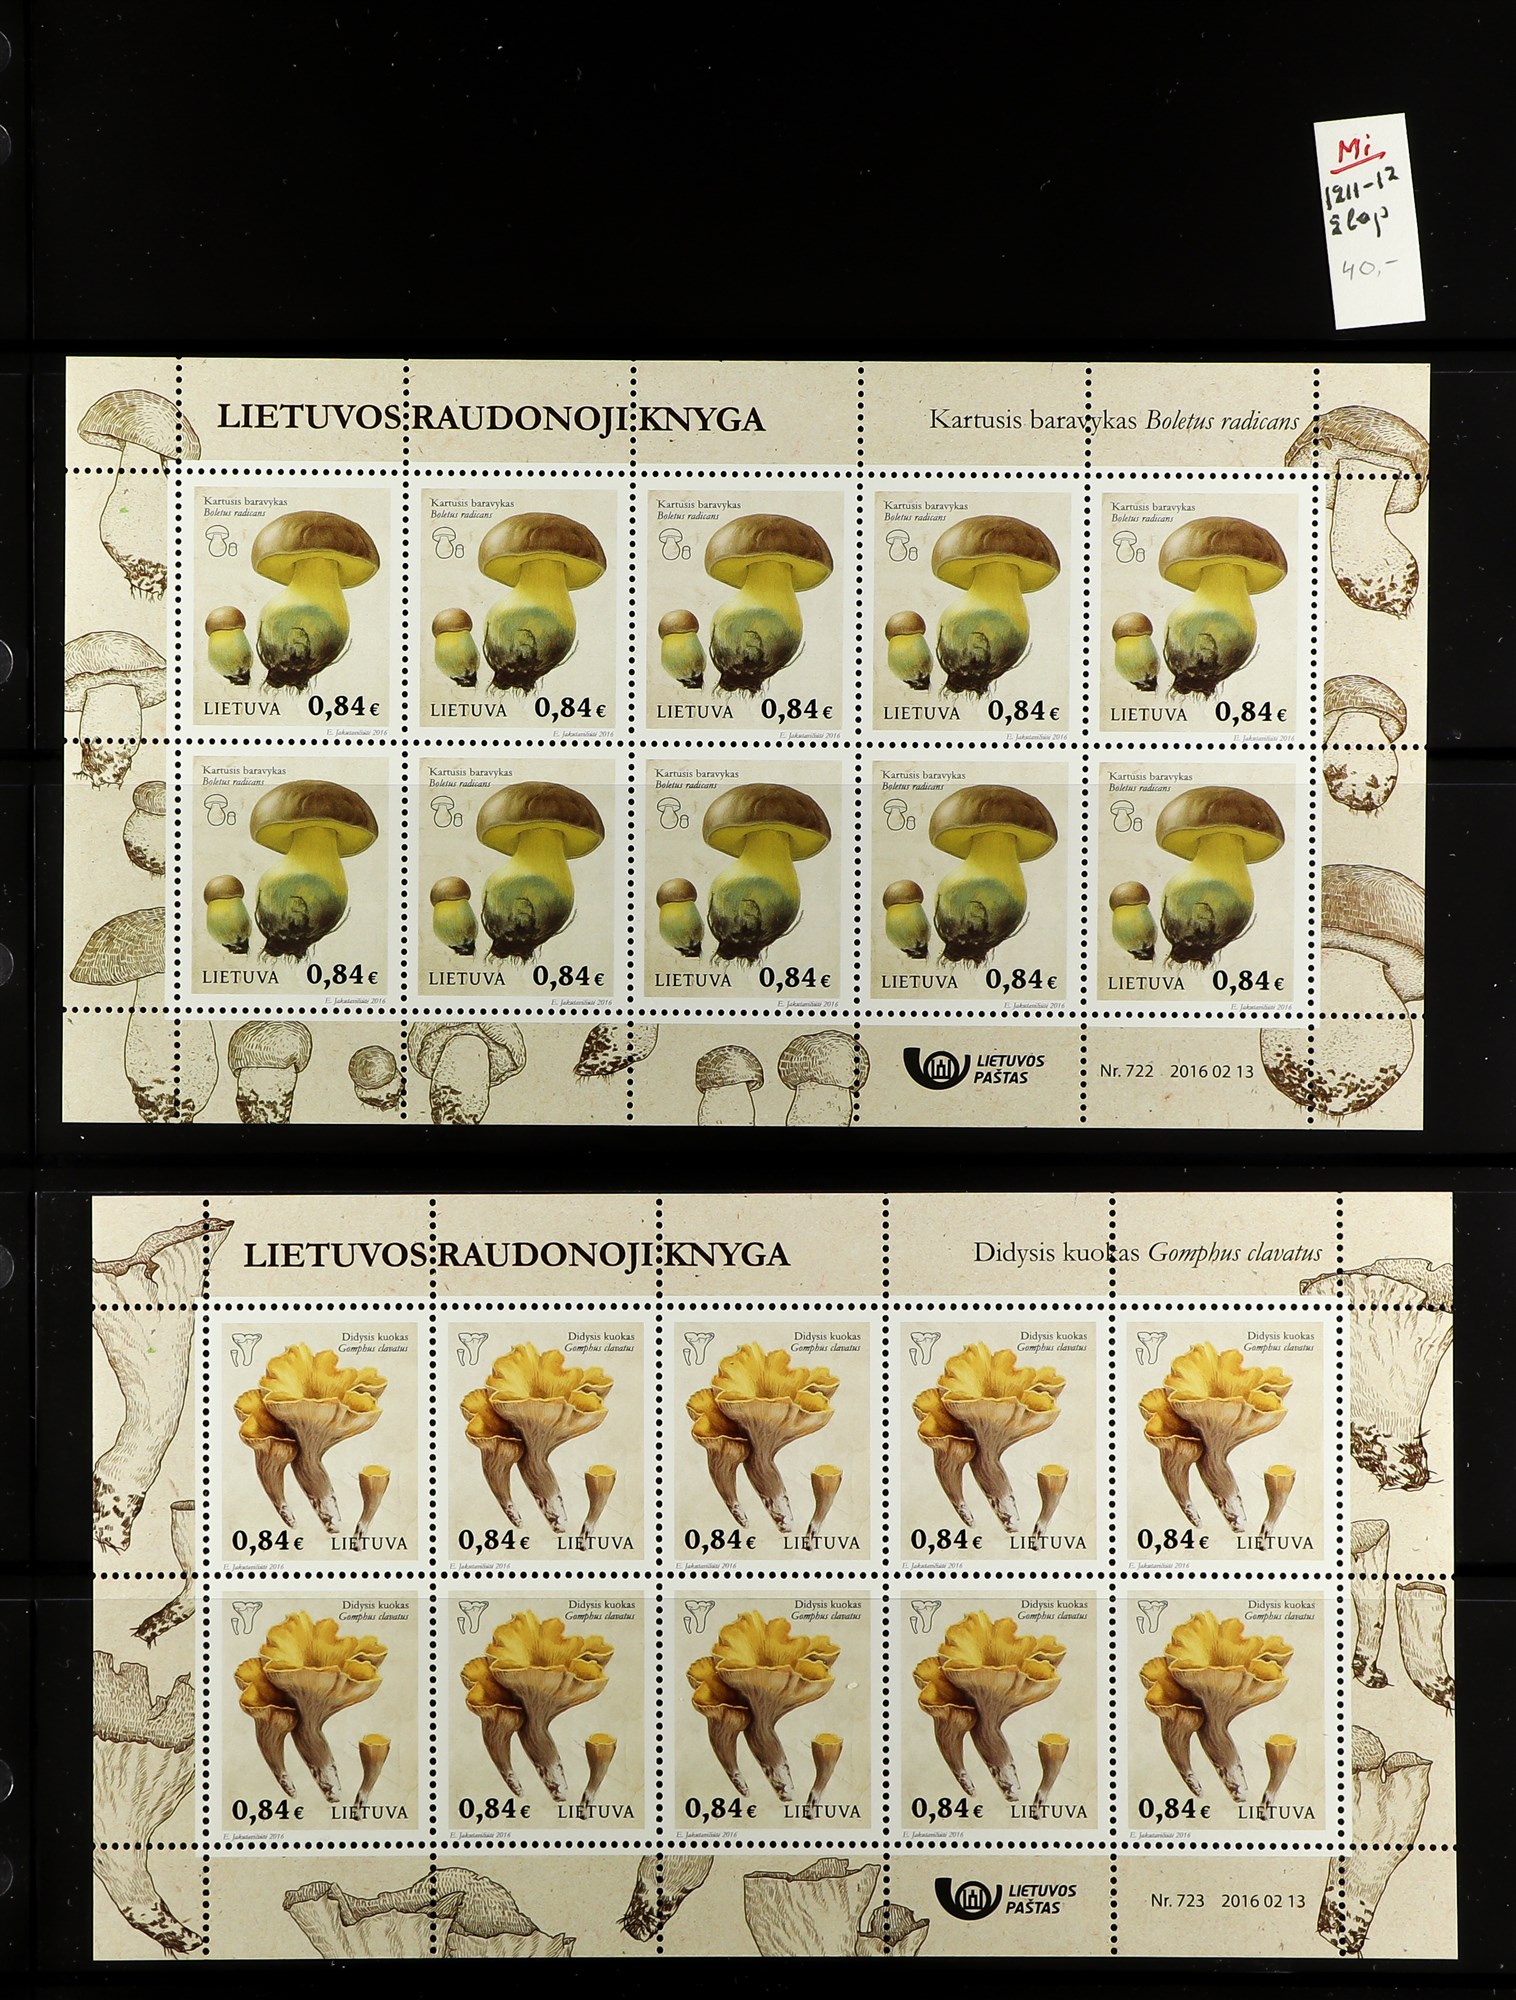 TOPICALS MUSHROOMS (FUNGI) OF EUROPE 1958-2018 never hinged mint collection of sets, miniature - Image 4 of 6